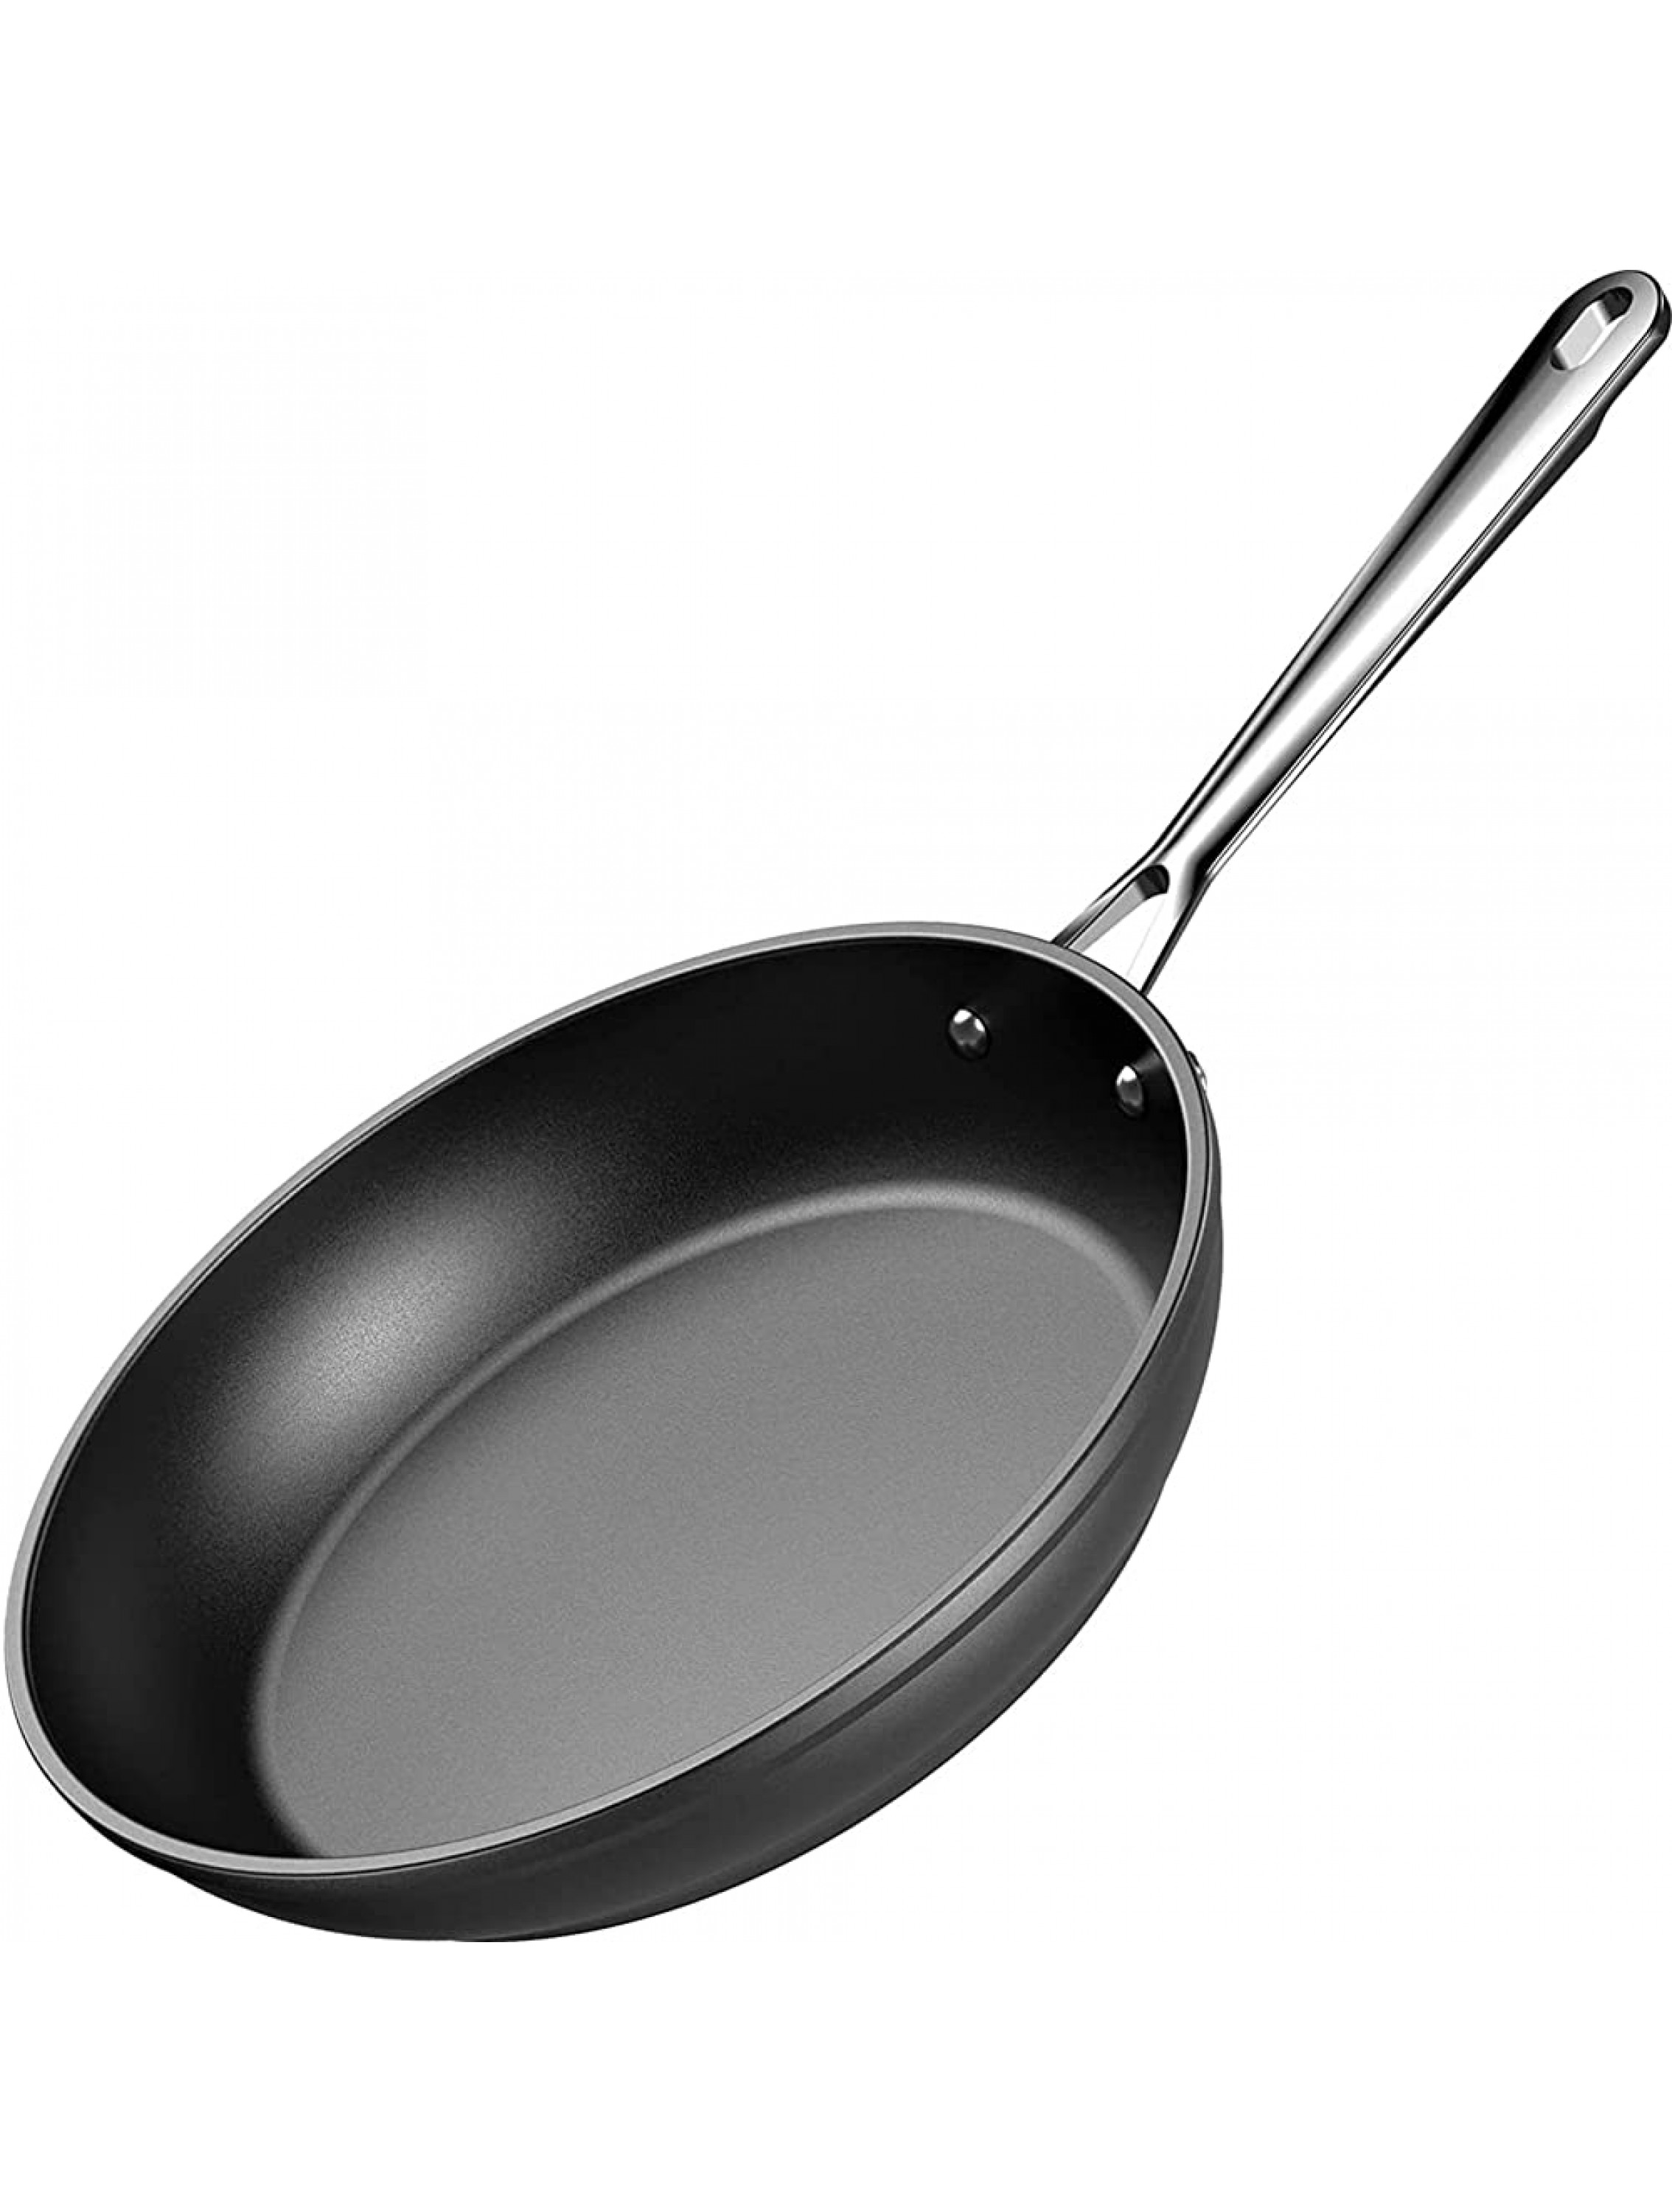 Nonstick Frying Pan Nonstick Skillet Hard Anodized Aluminum with Anti Warp Base Stainless Steel Handle Nonstick Fry Pan for Gas Electric Induction Cooktop Dishwasher Oven Safe-Black 8IN - BBKPG0GIV